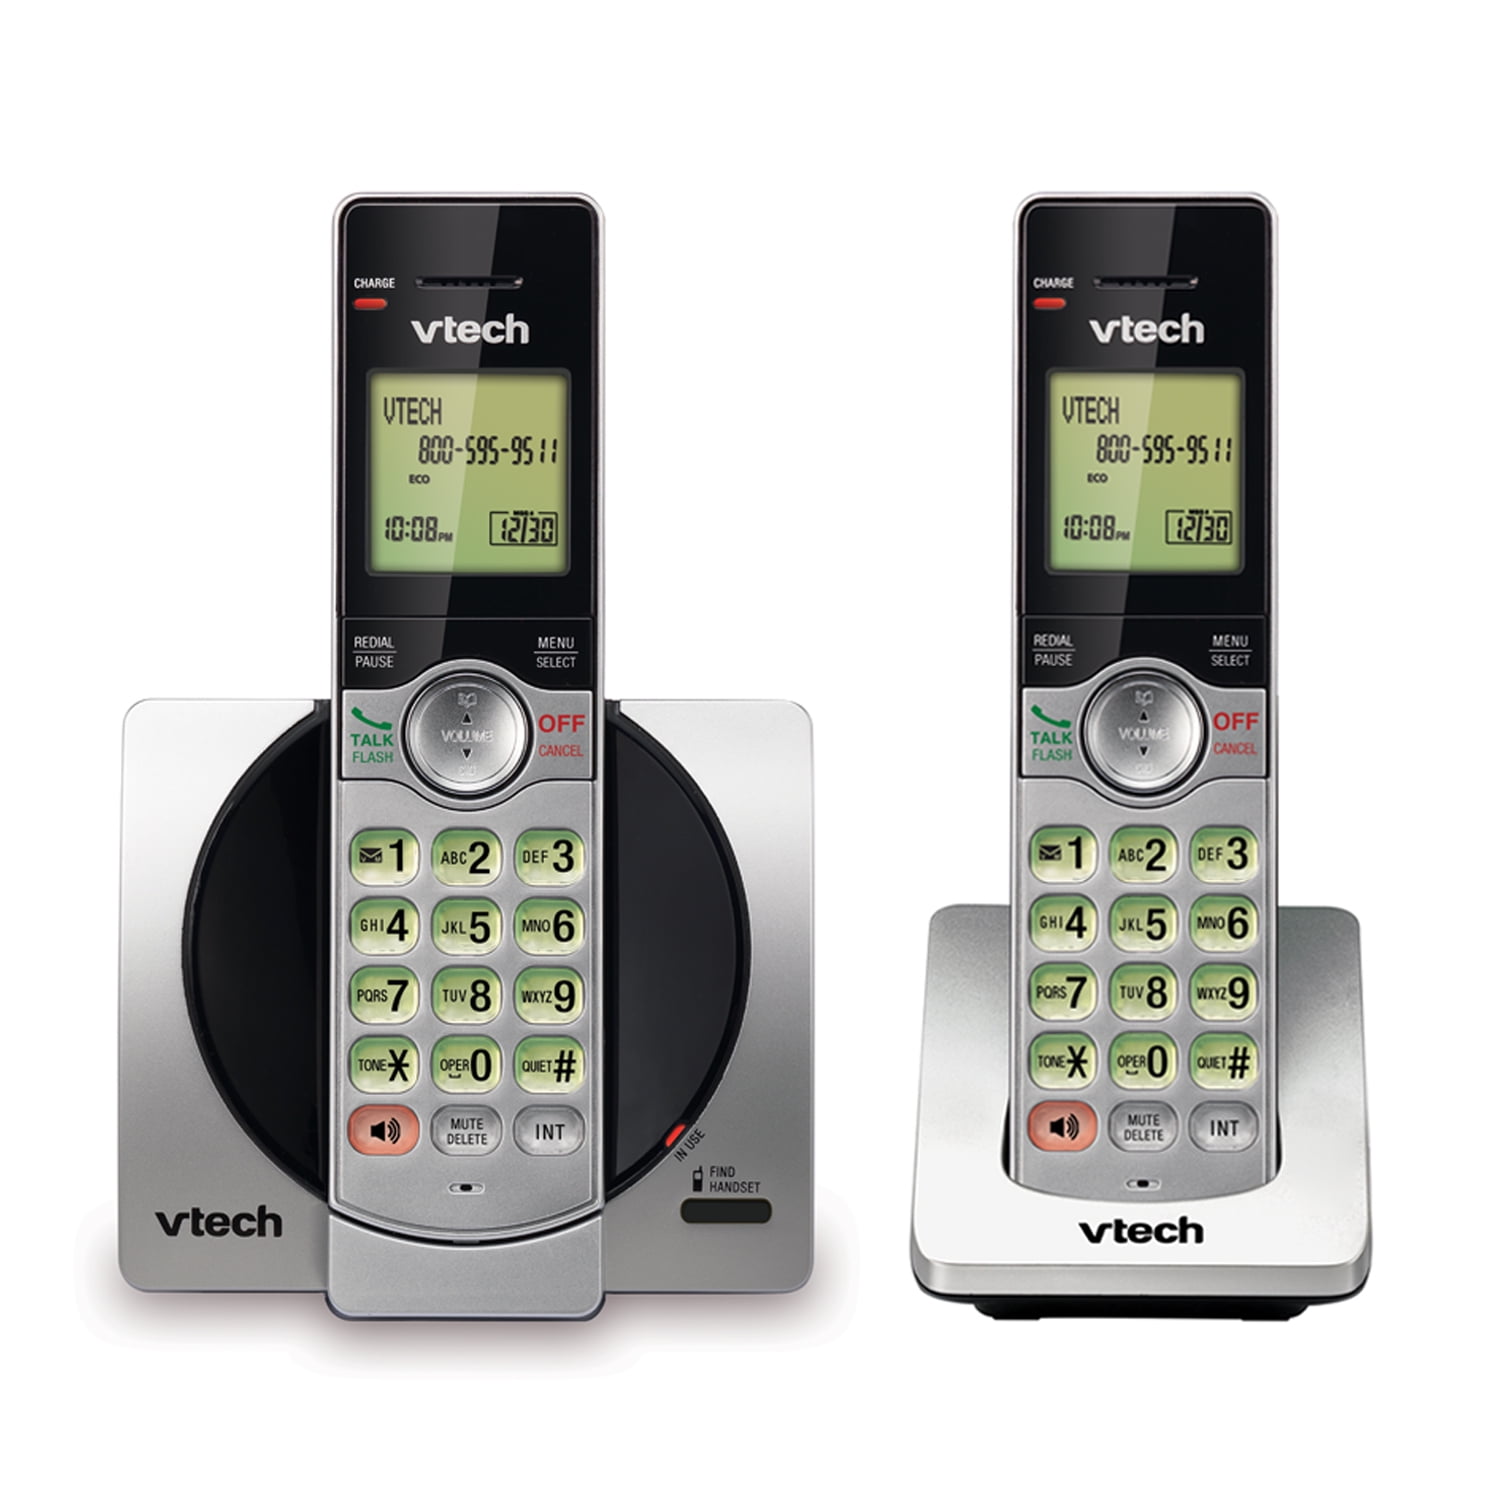 CS6919 VTech Cordless Phone System w/ Caller ID Call Waiting DECT 6.0 Silver ™ 